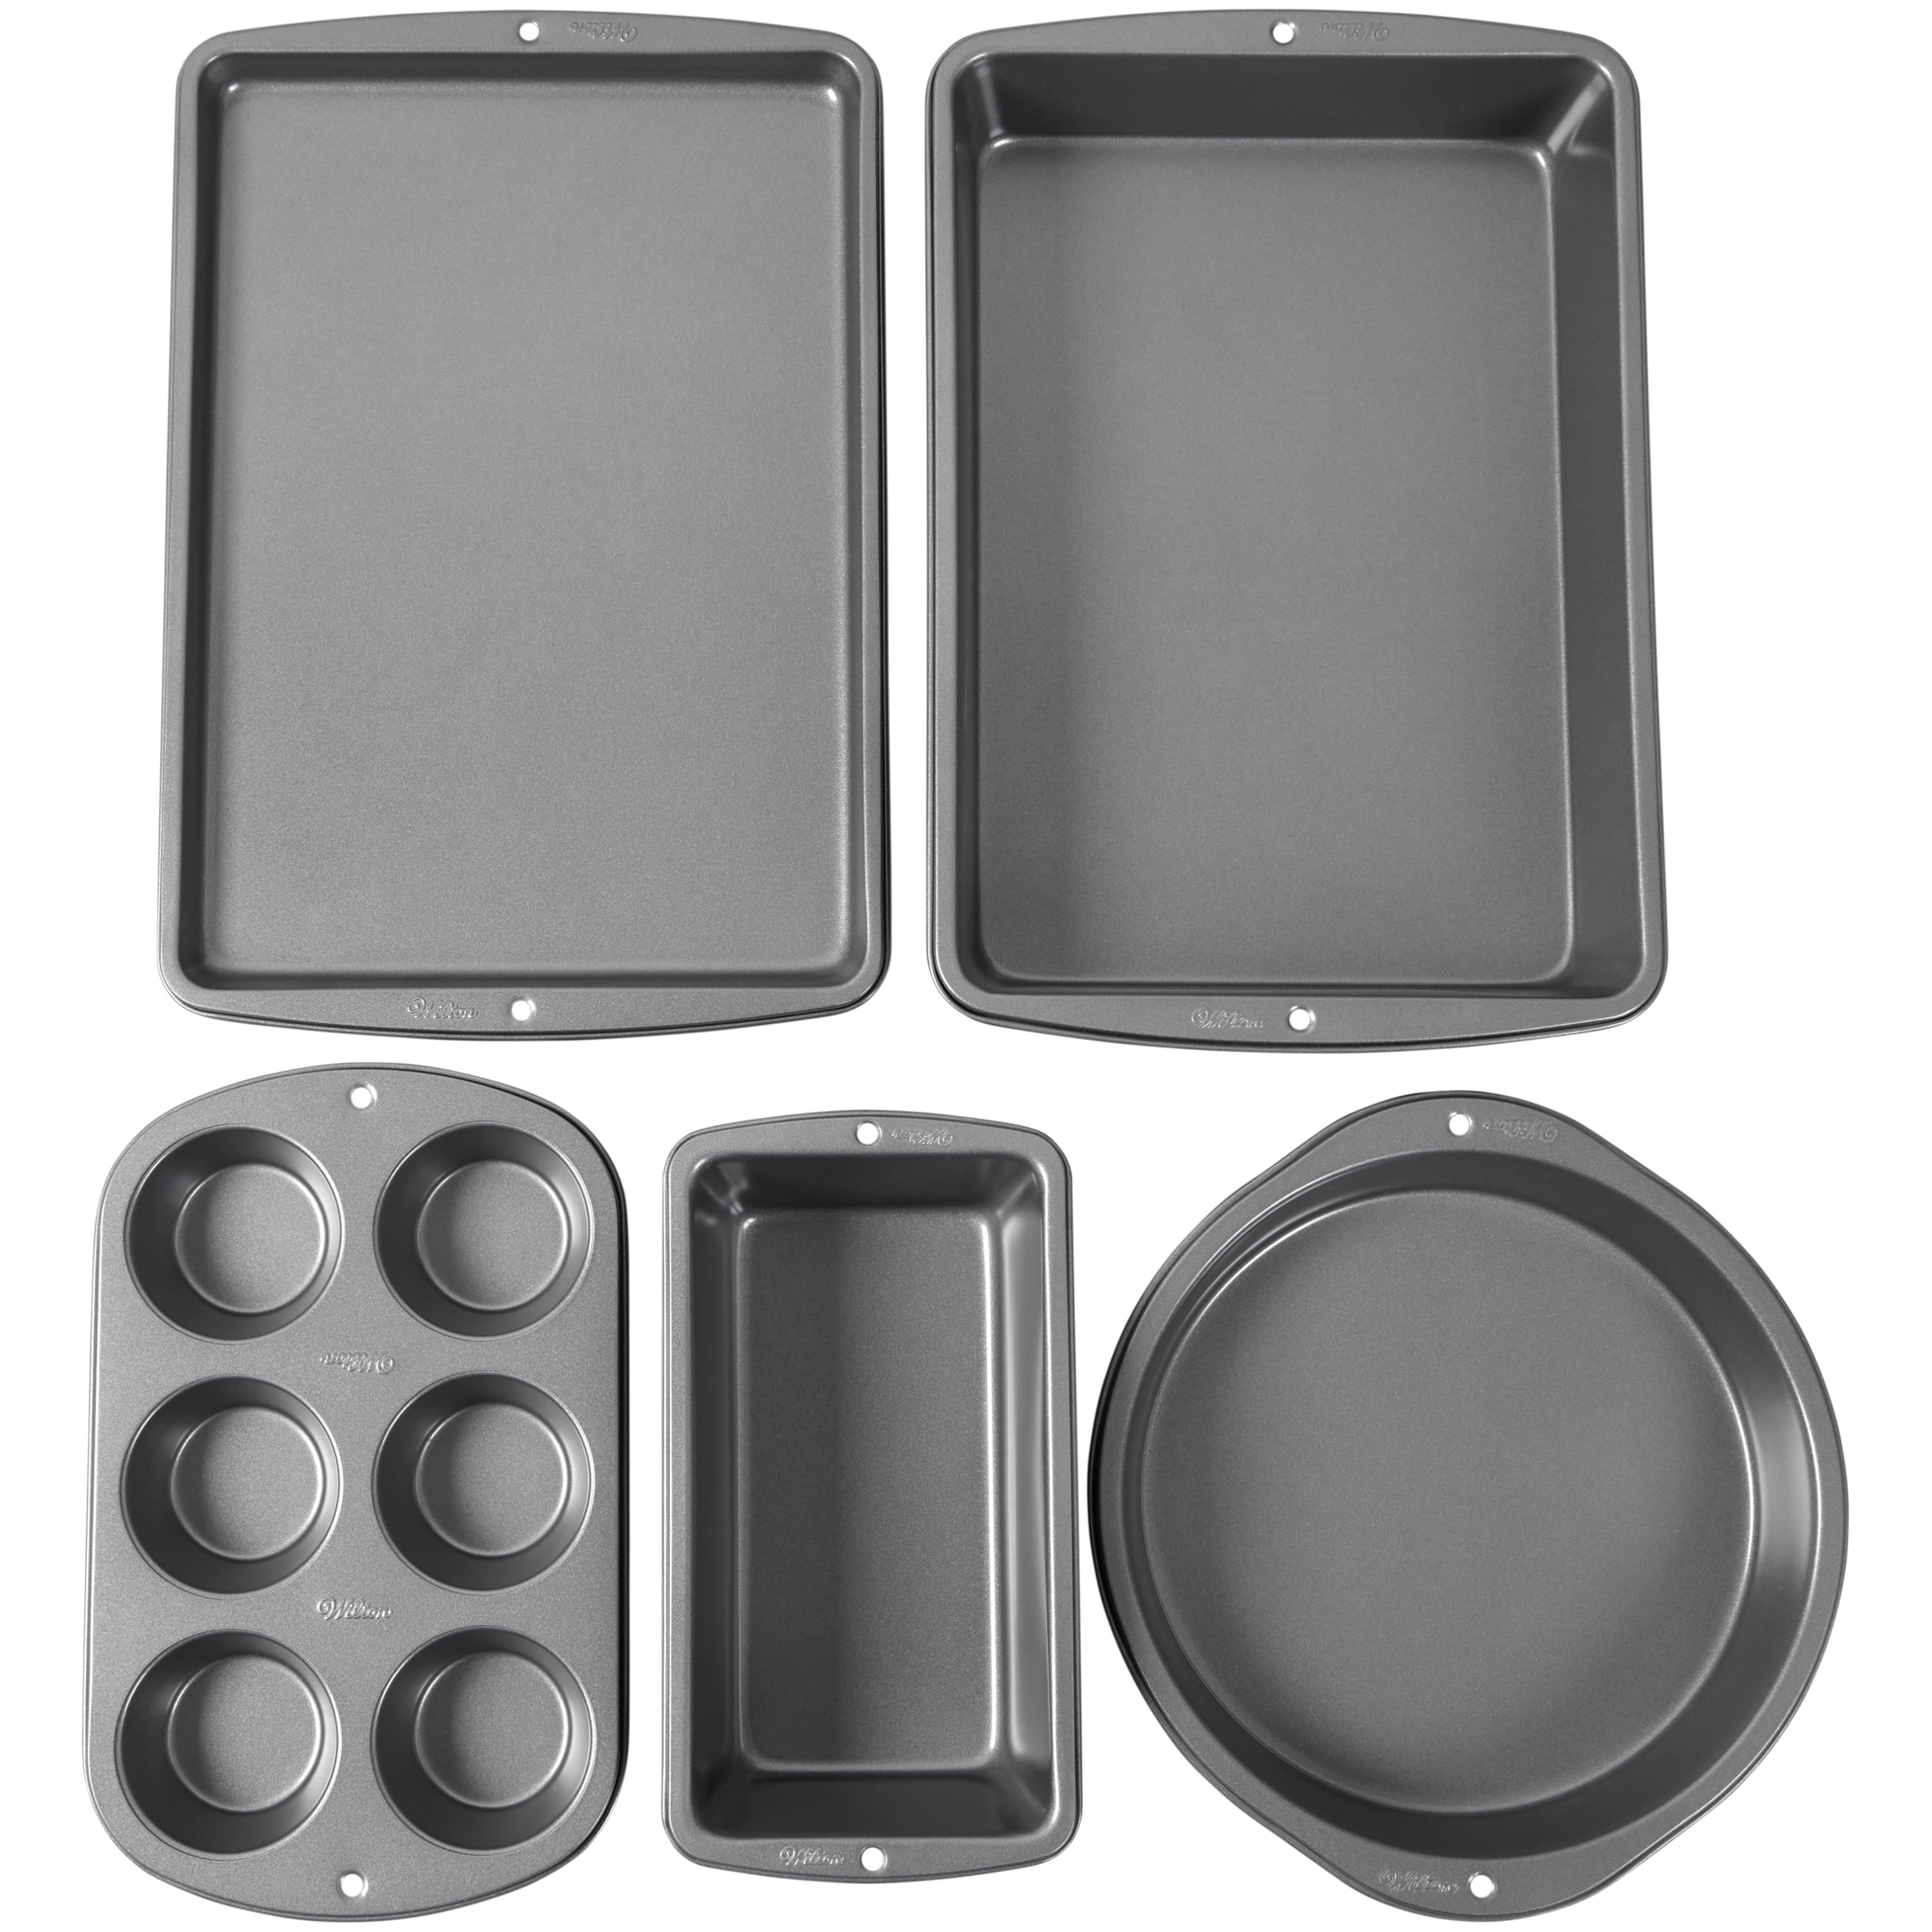 Wilton Ever Glide Non-Stick Bakeware Set for Cooking and Baking, 6-Piece Set